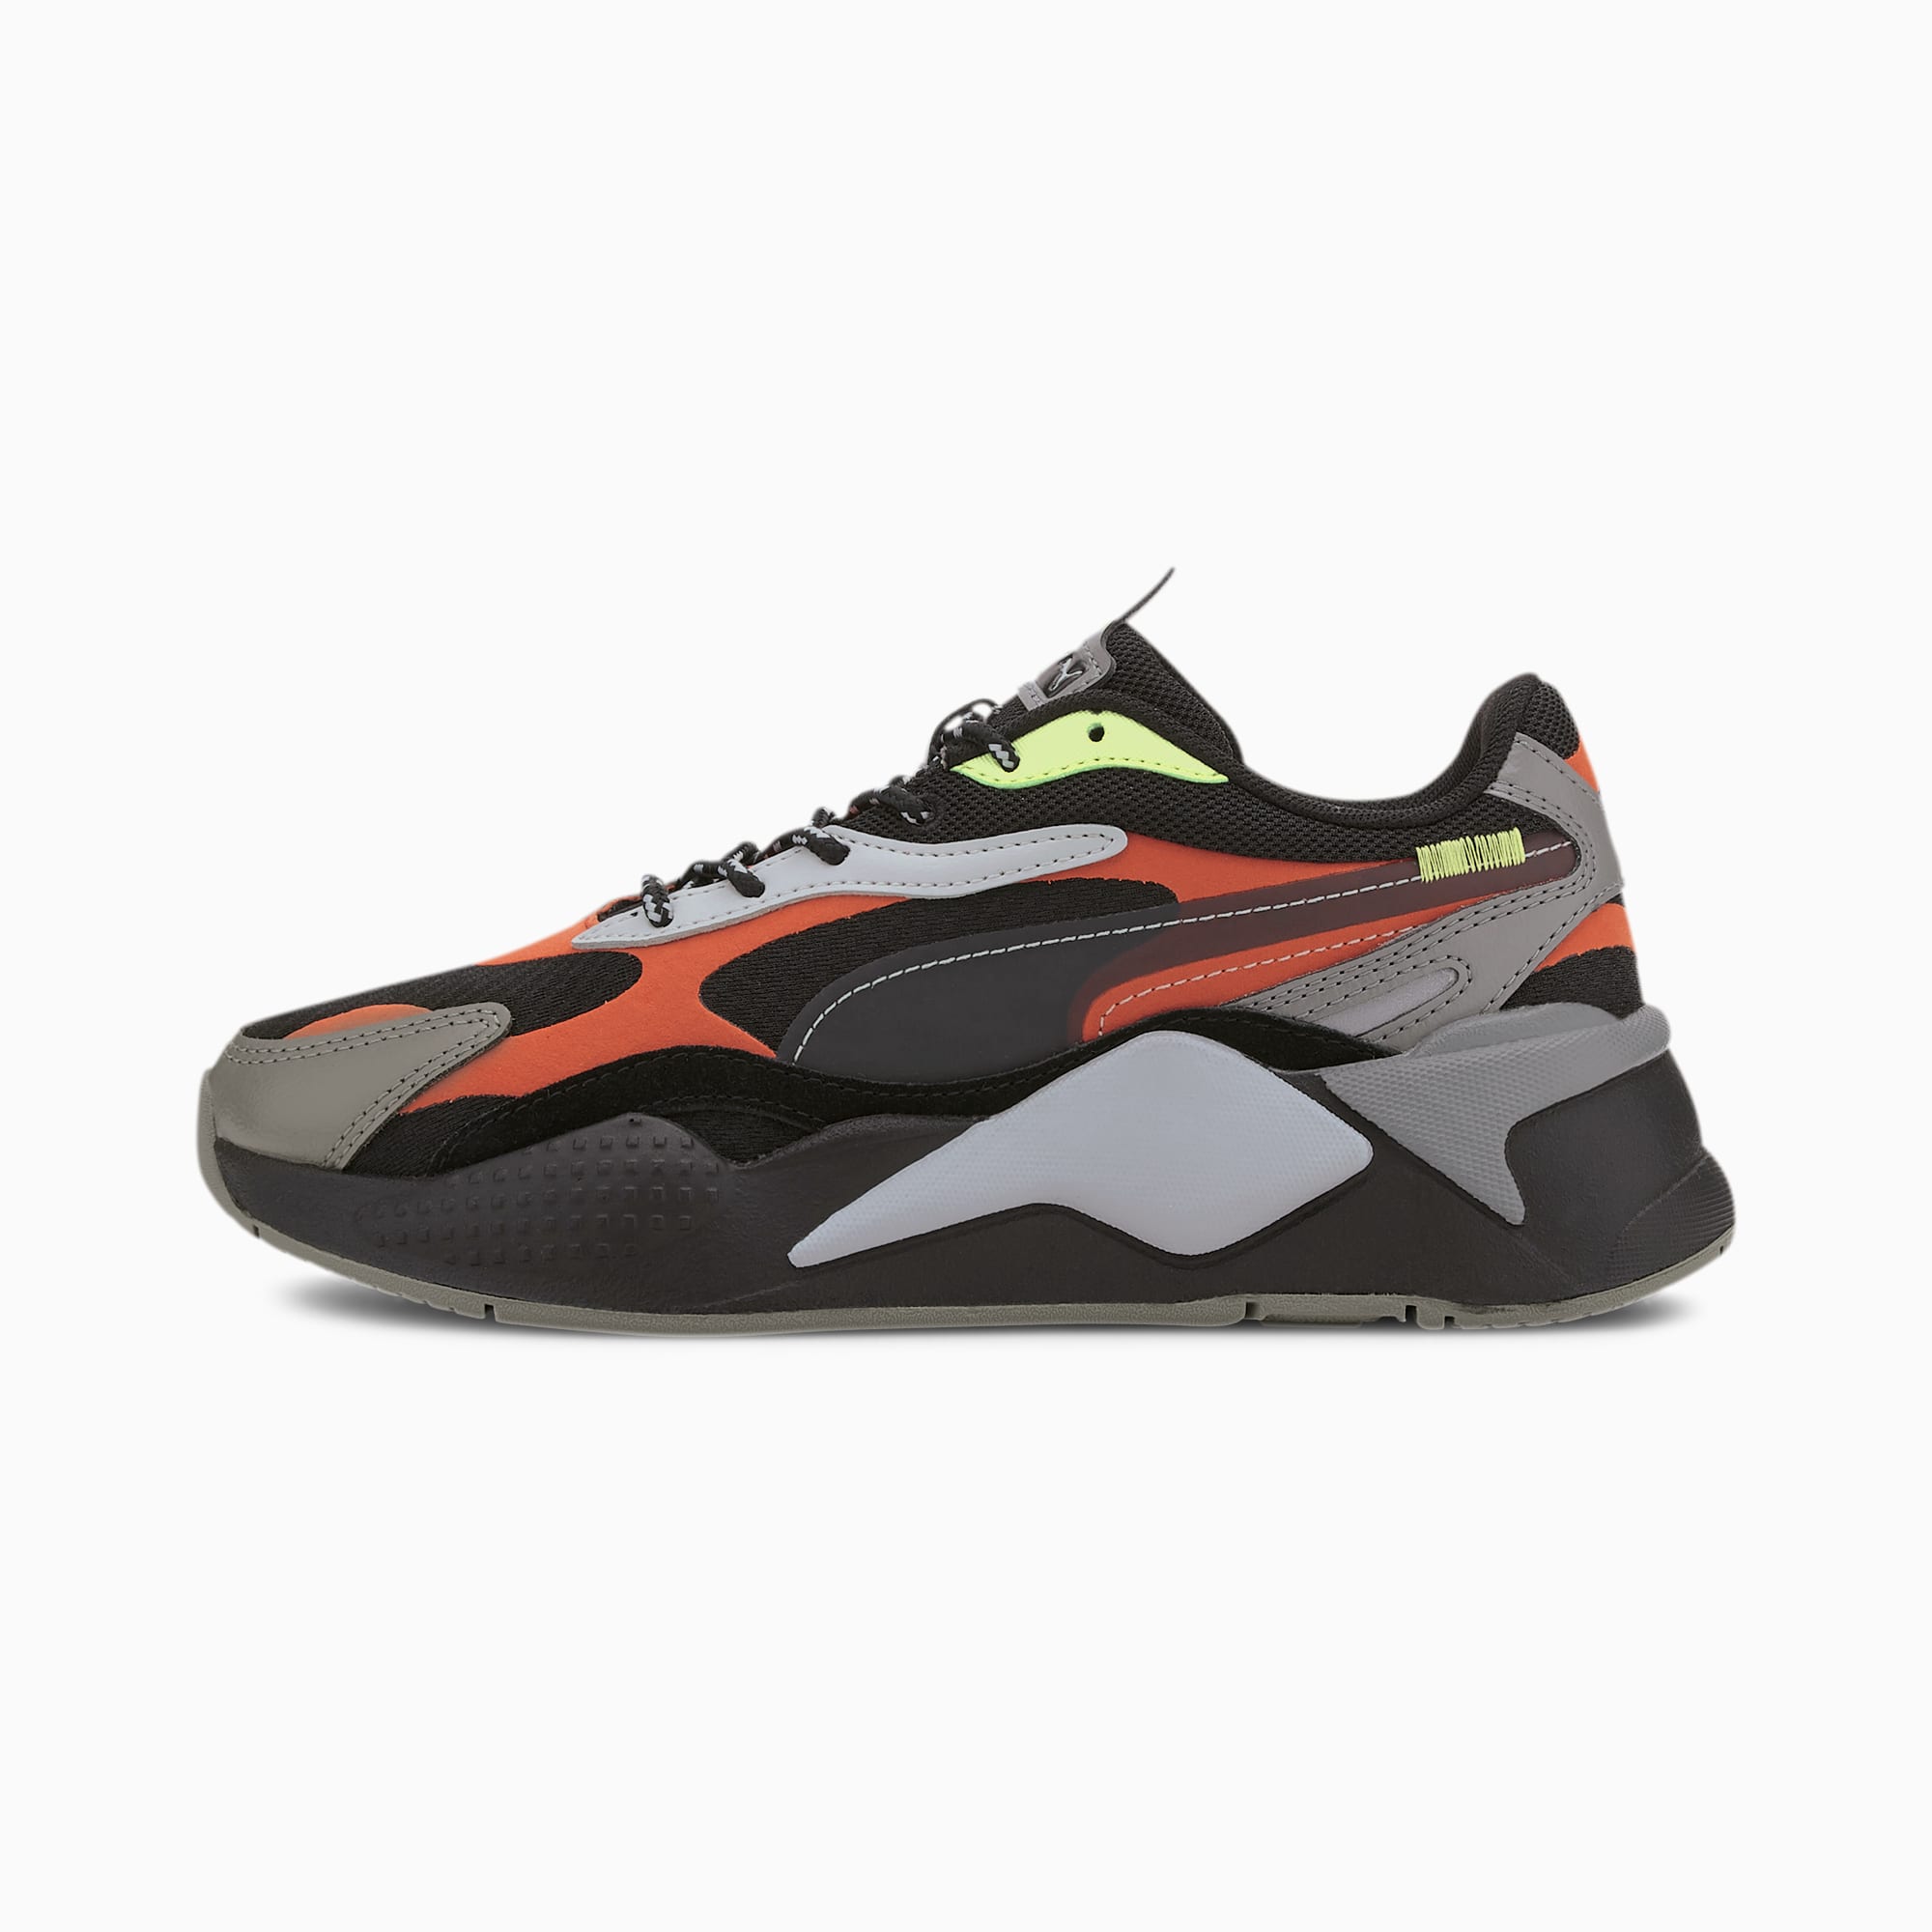 Basket RS-X3 City Attack PS (4801951825983)